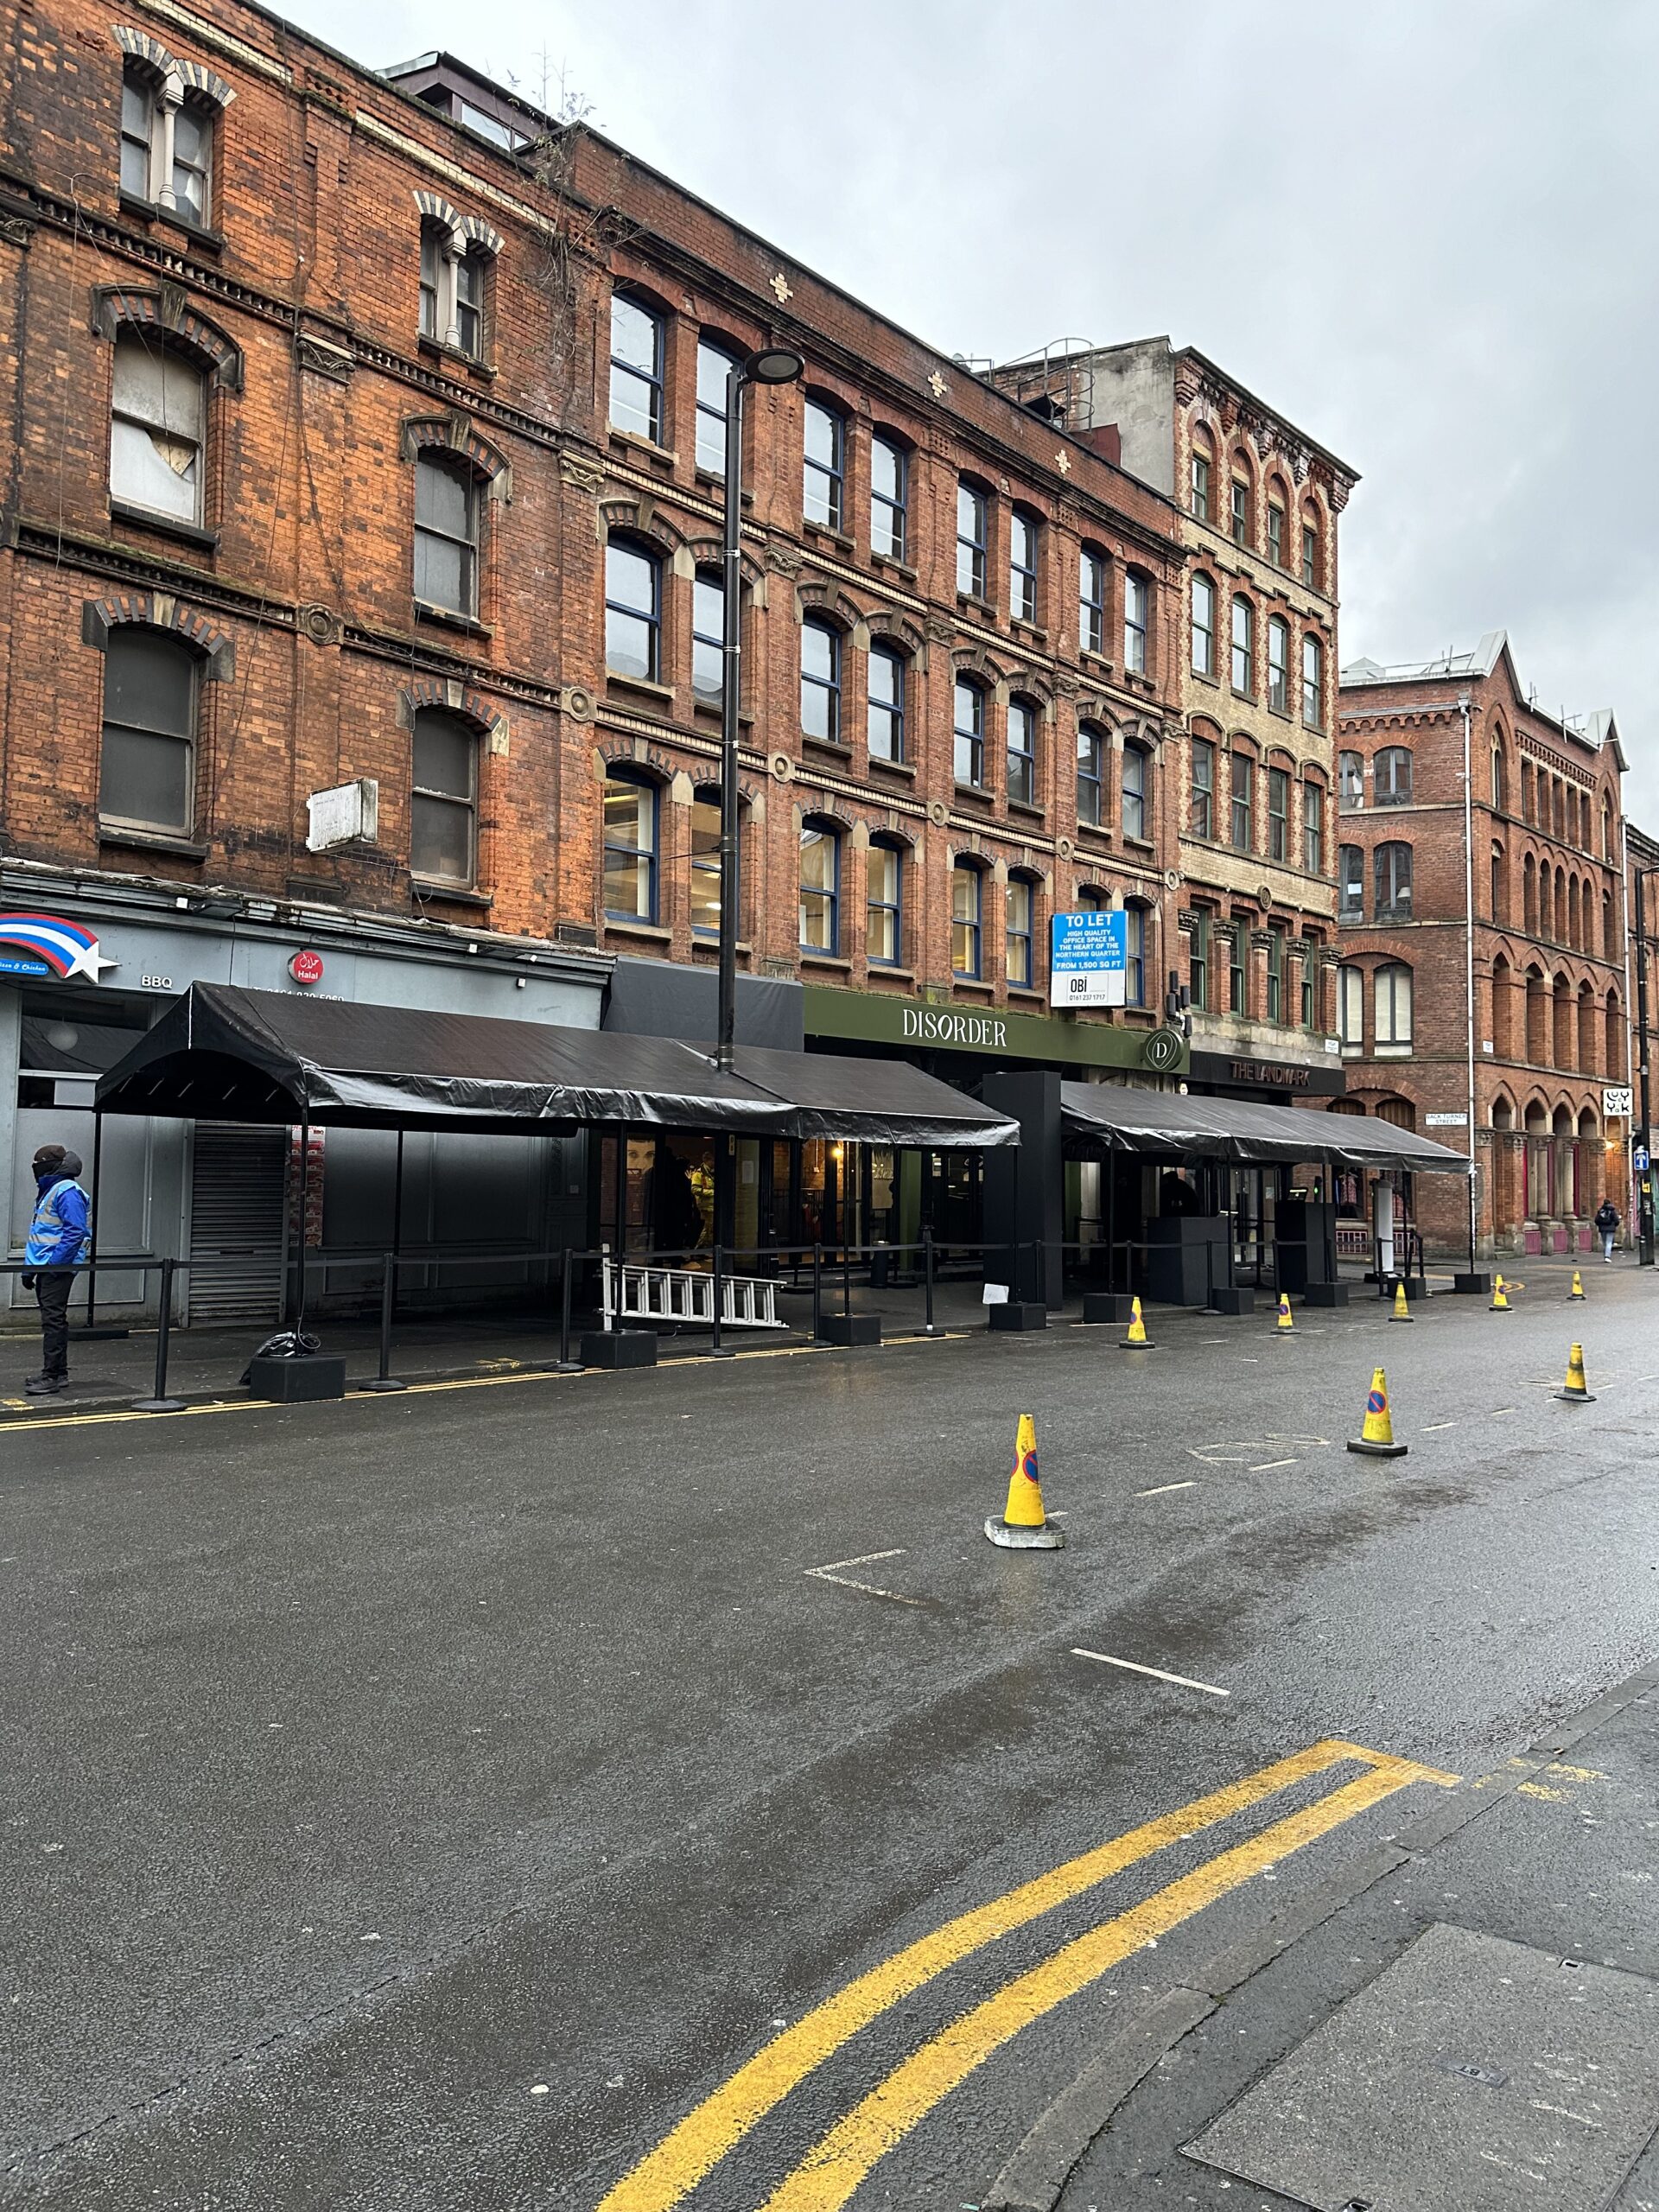 Road closures in the Northern Quarter for the Chanel fashion show